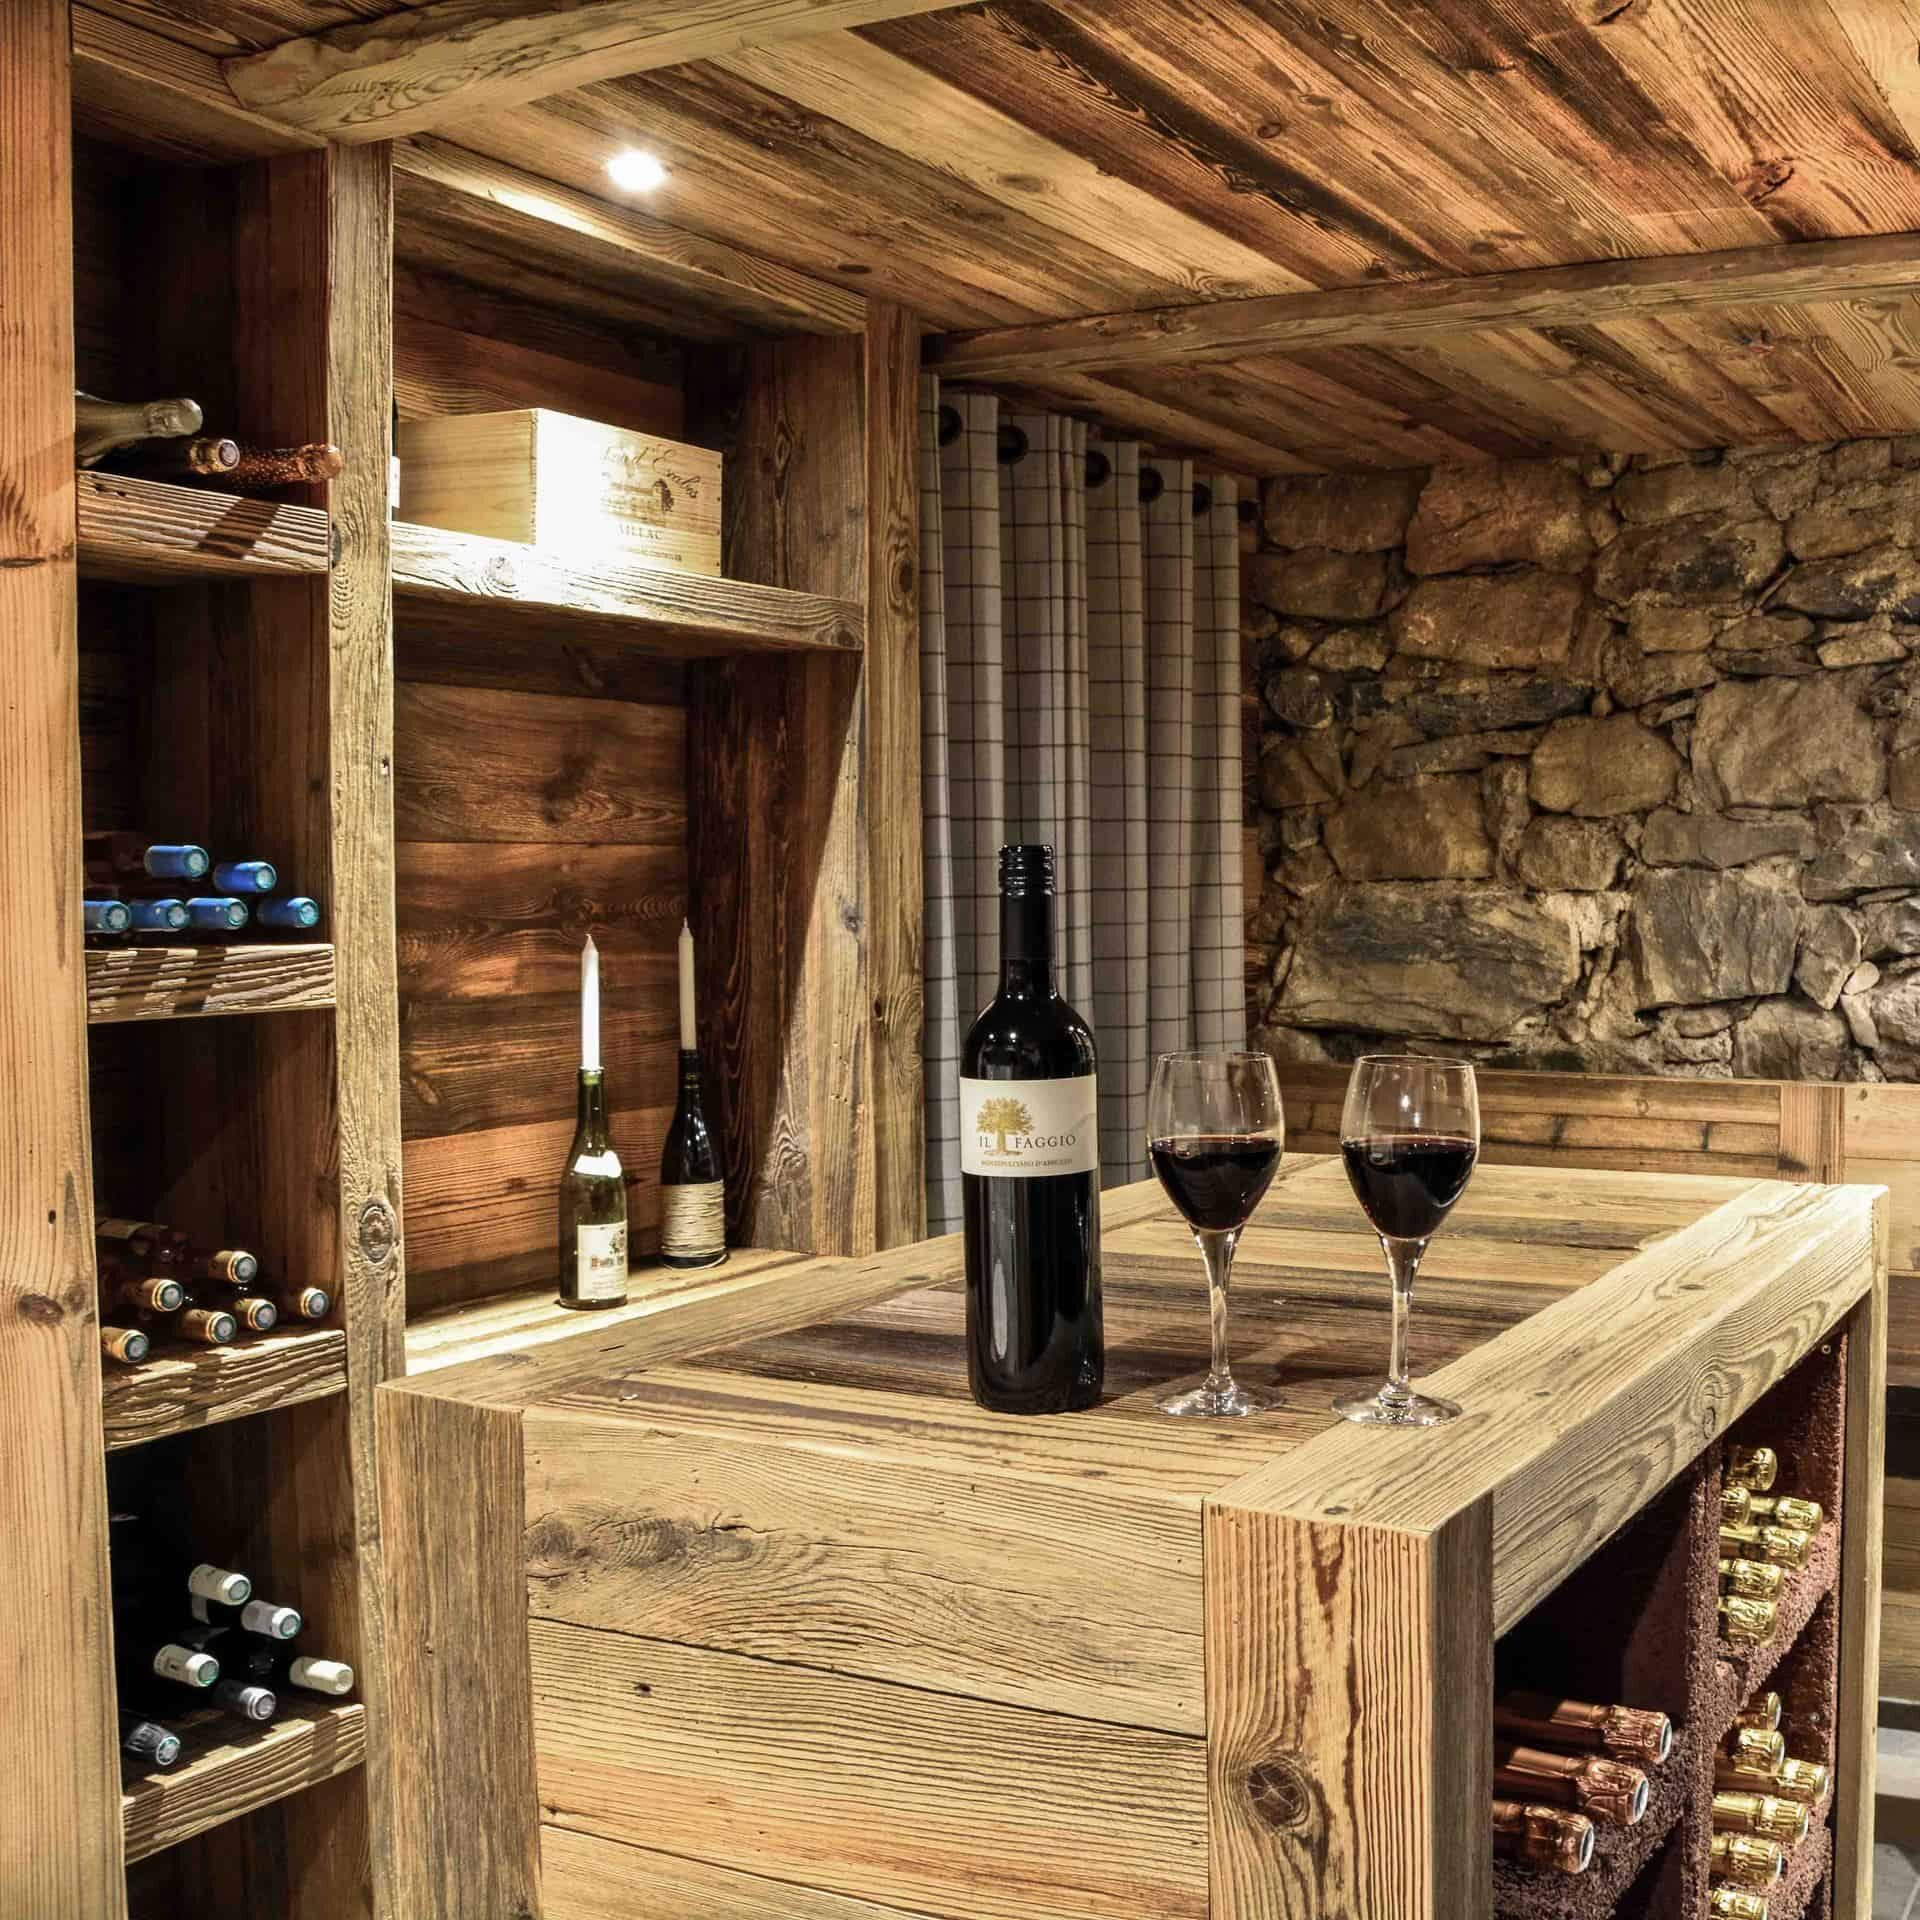 The luxurious carnotzet as our wine cellar is known